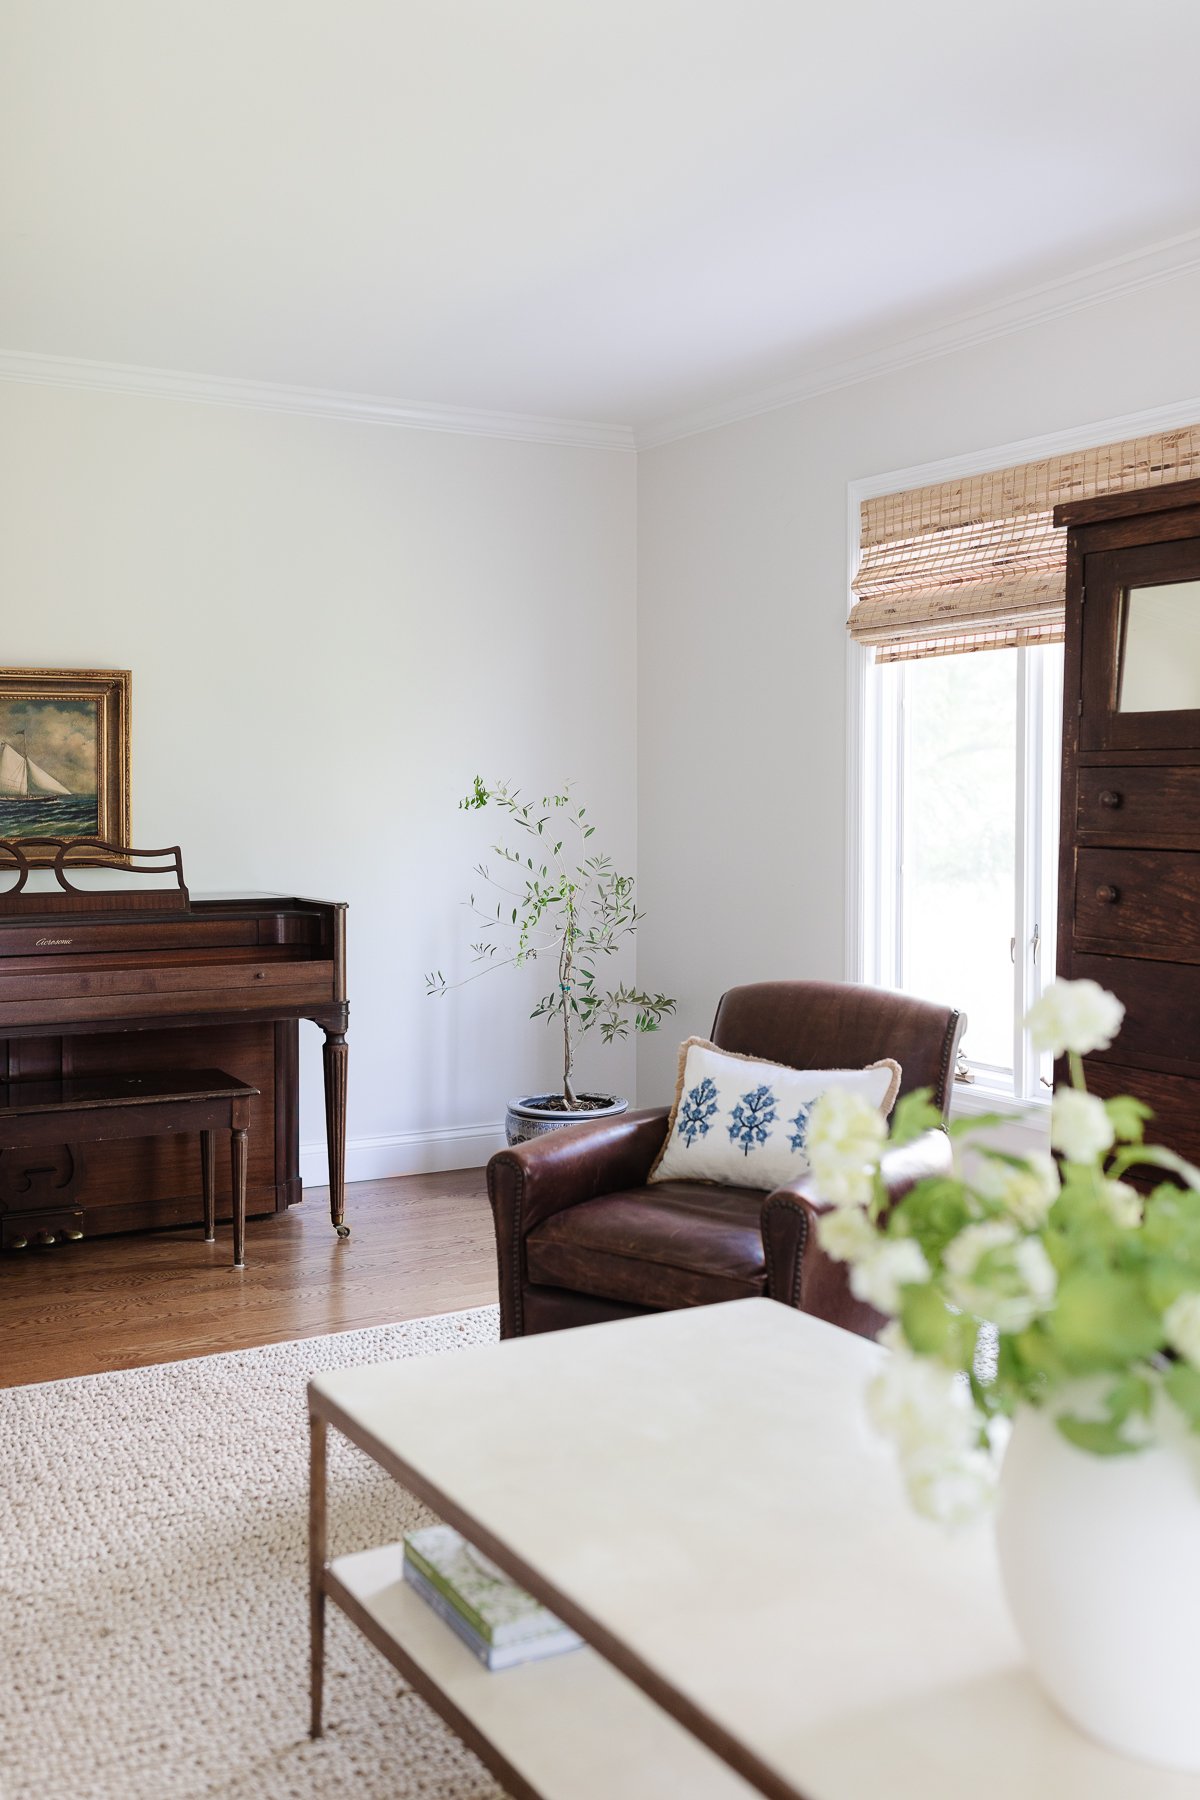 A family room with an antique piano and armoire, leather chairs and bamboo blinds.